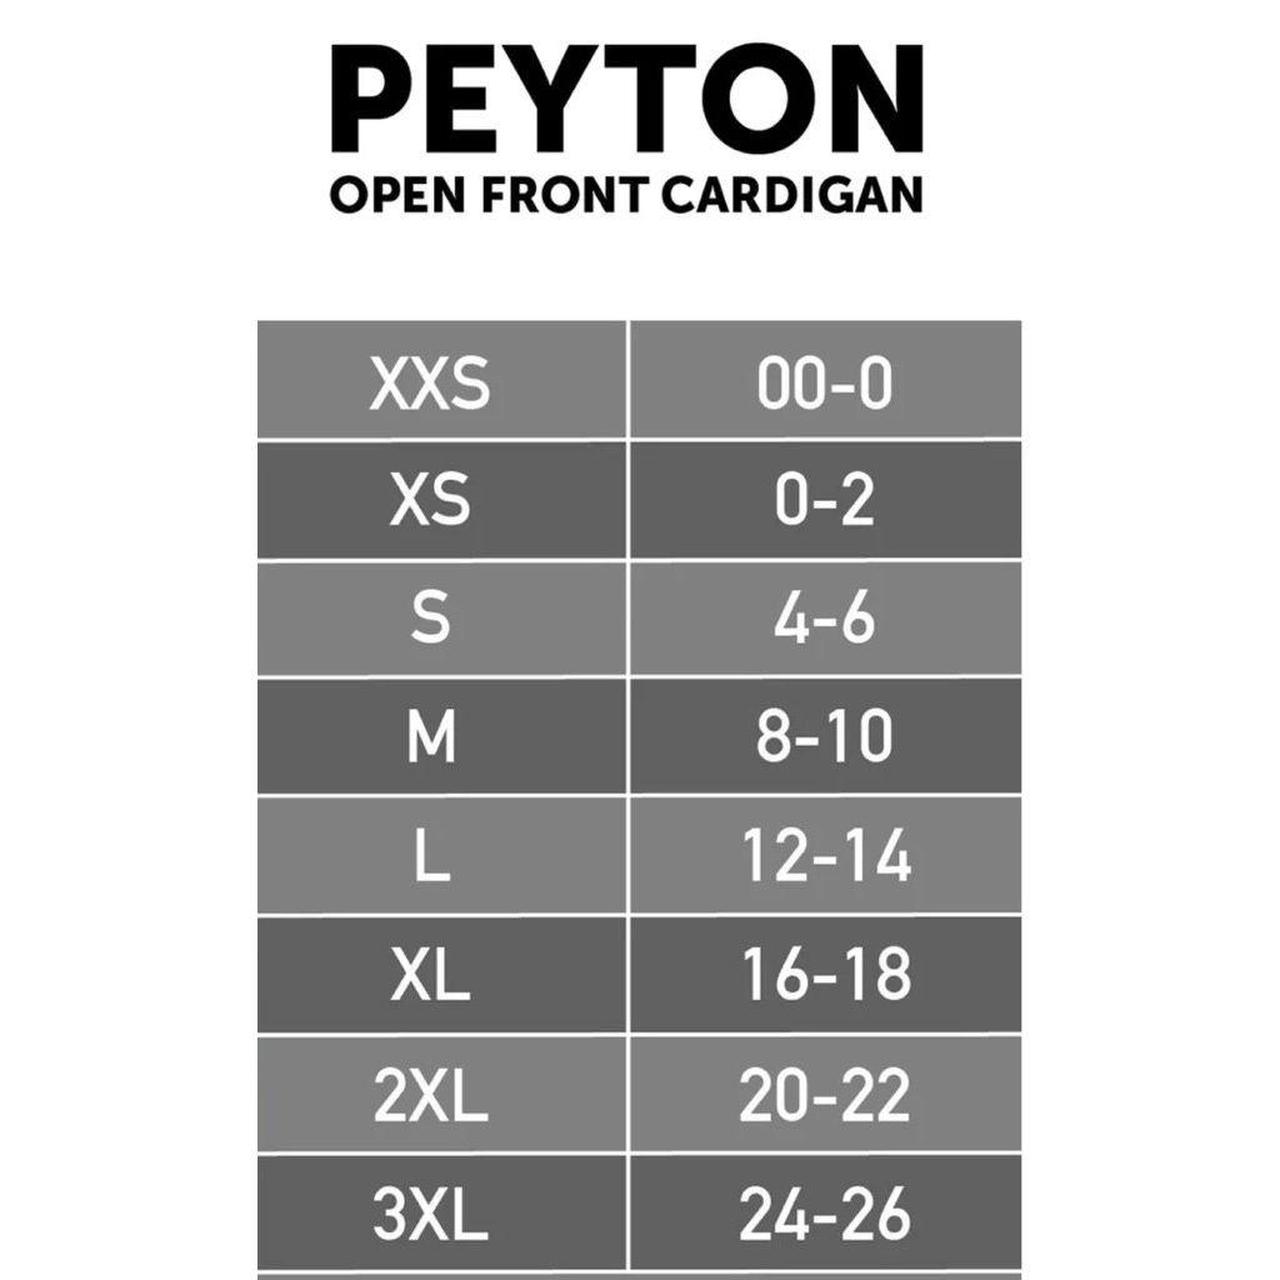 Peyton Open Front Cardigan - Women's Collection